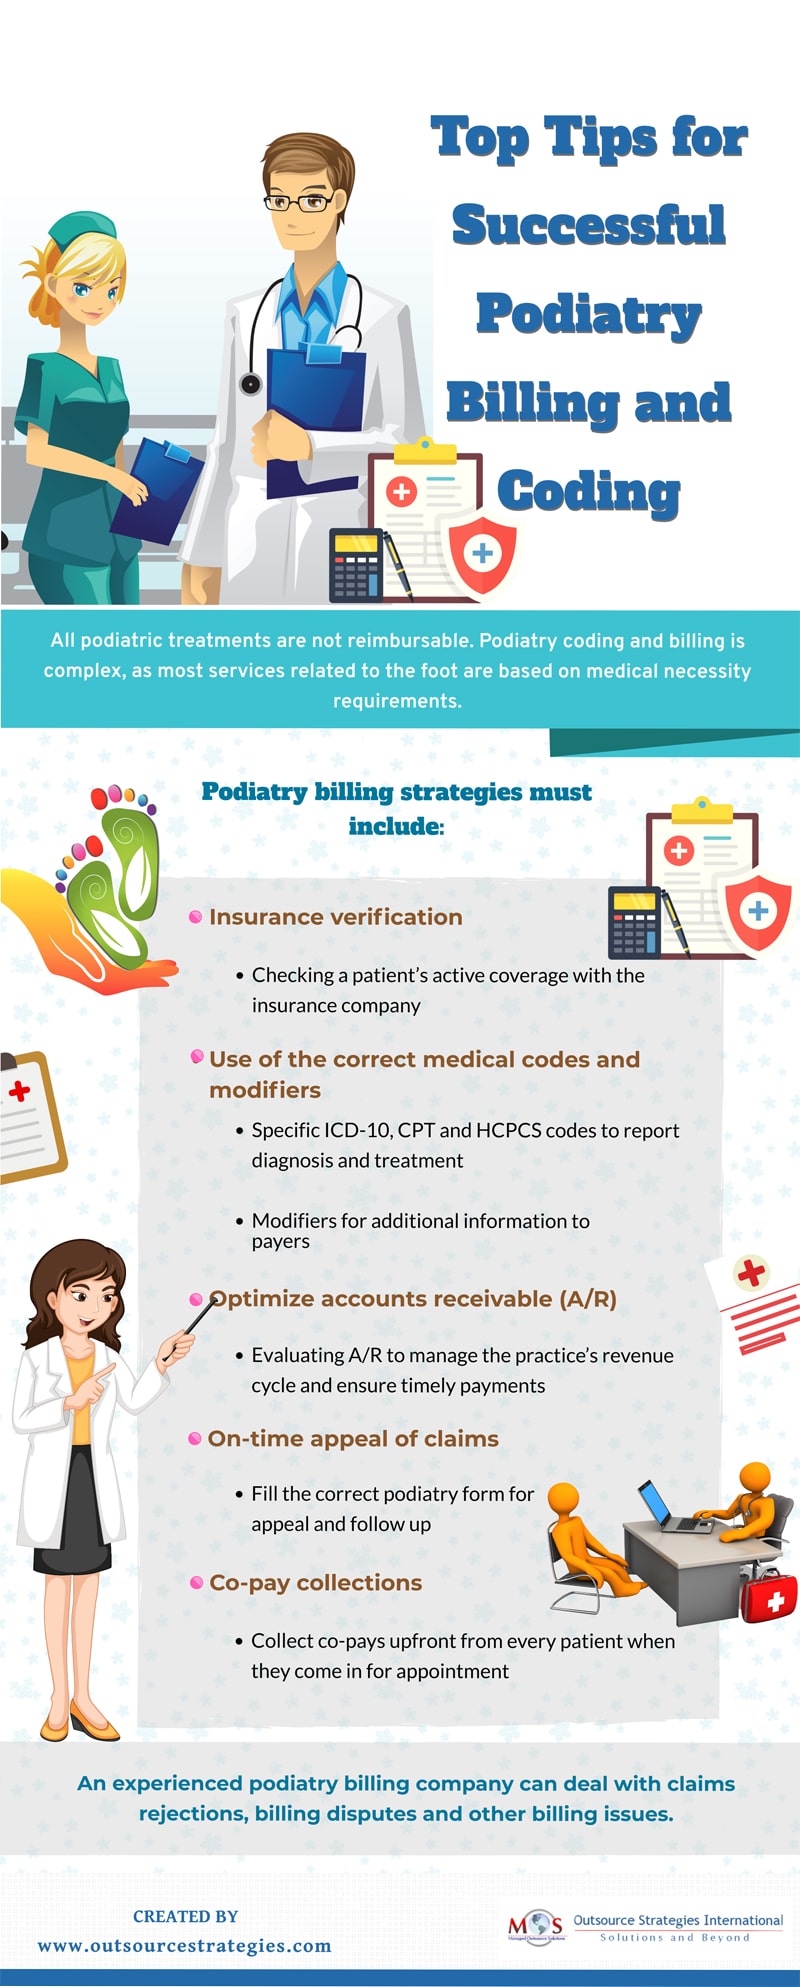 Tips for Successful Podiatry Billing and Coding